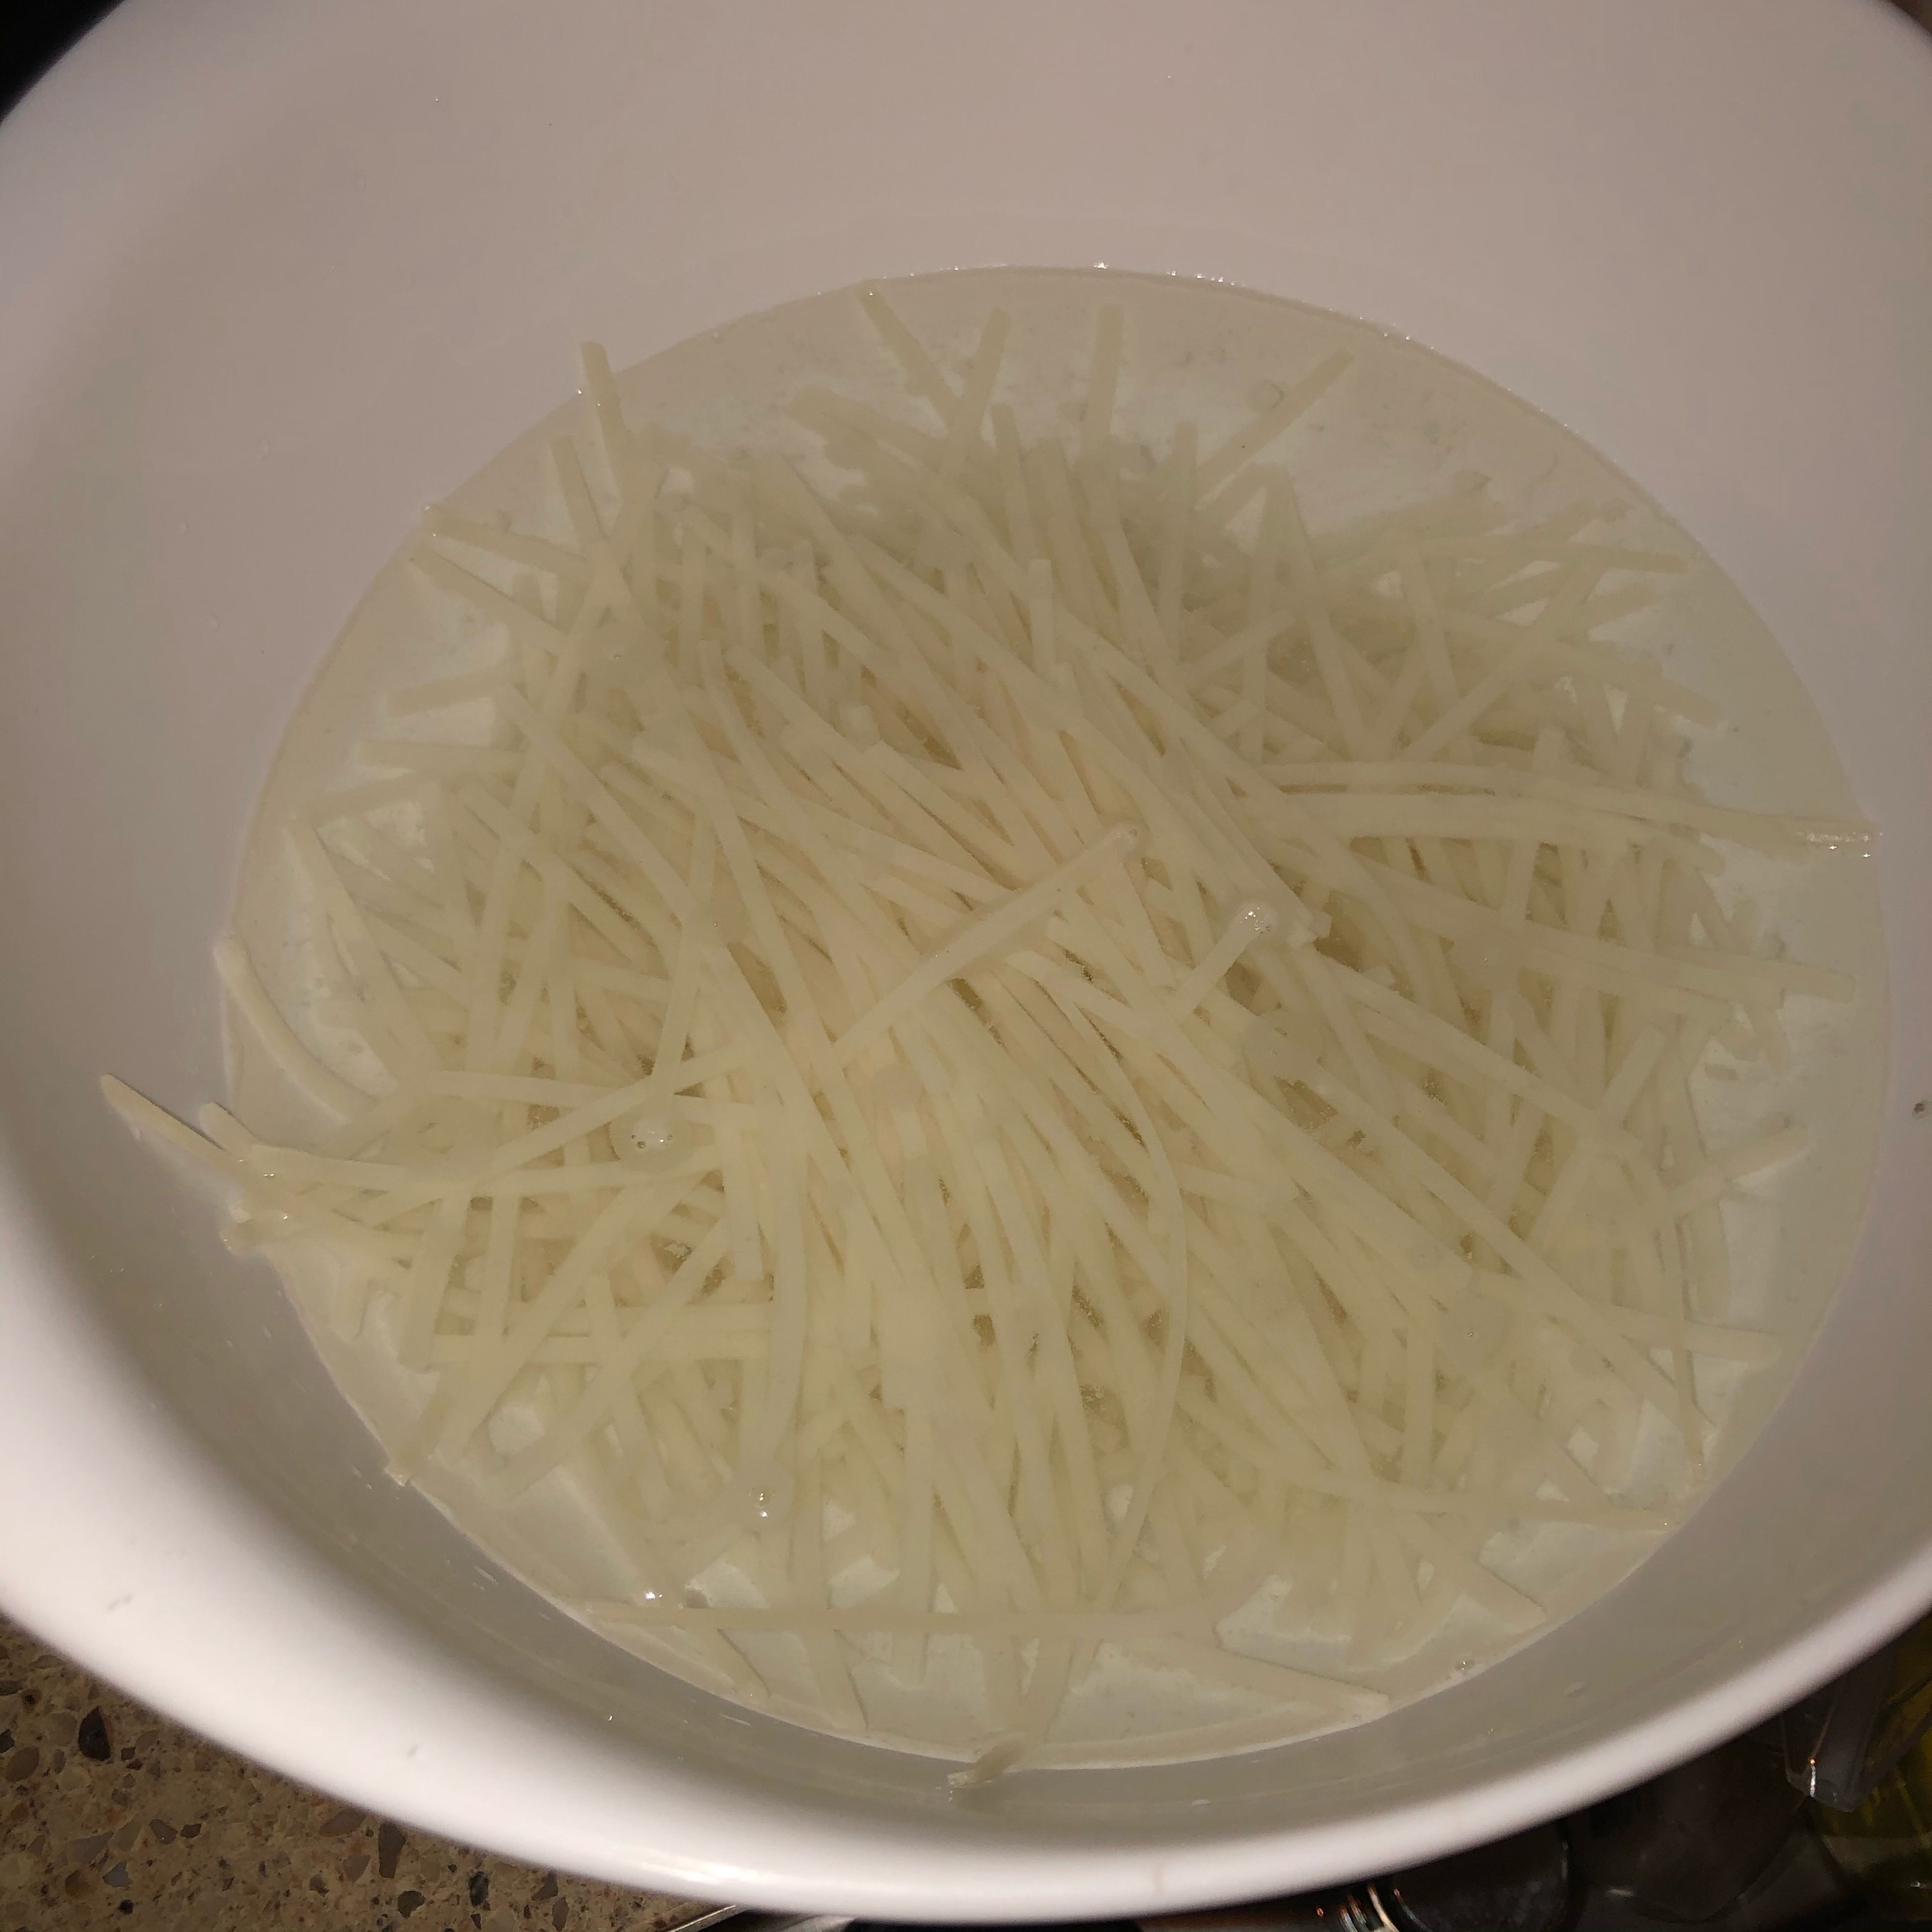 Place noodles in a bowl. Cover noodles with warm water for 20 minutes.